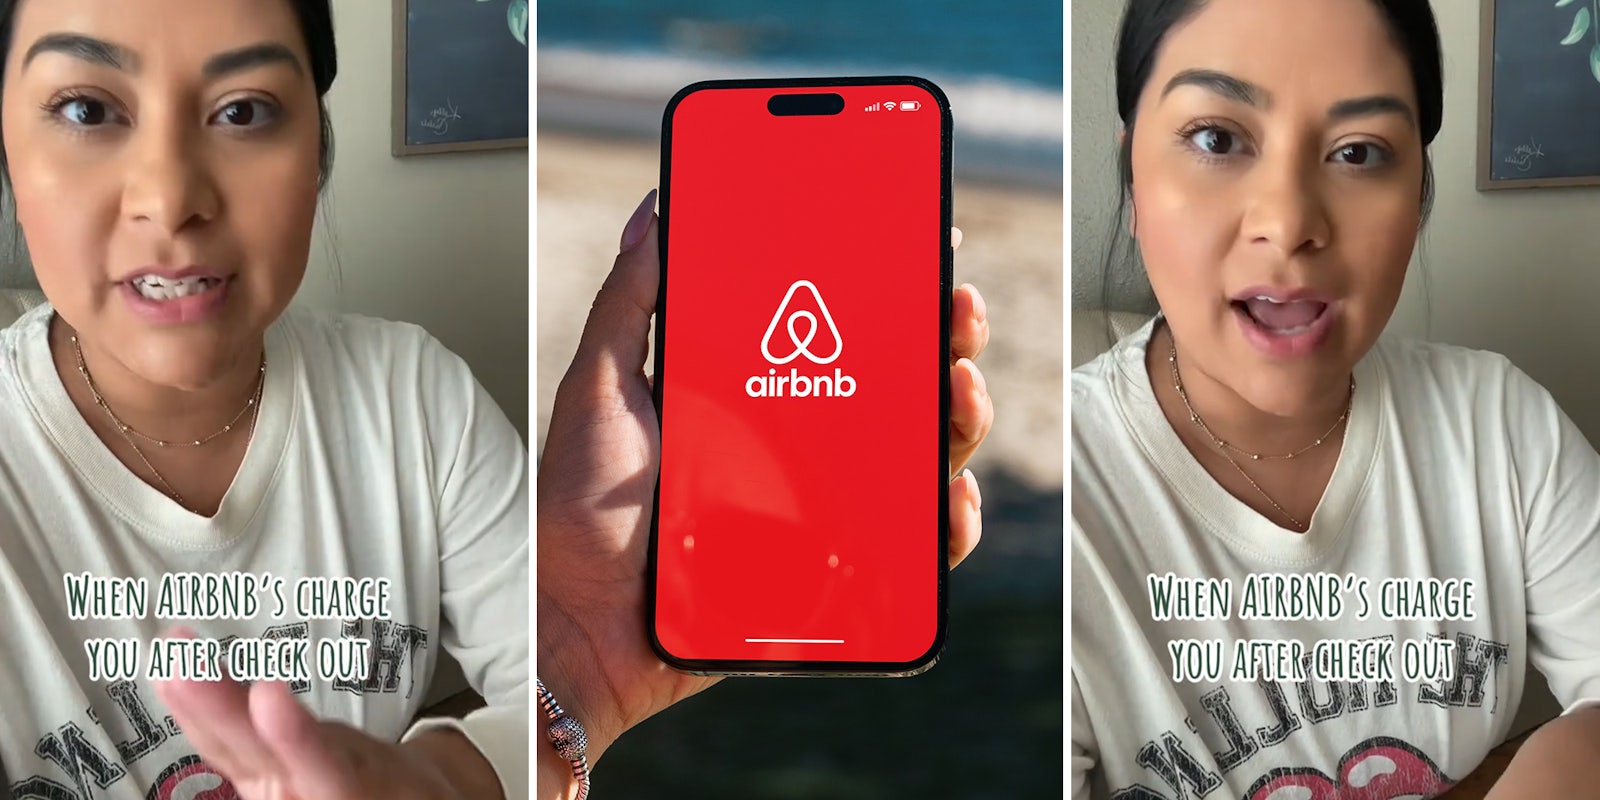 Airbnb guest says she was charged at checkout for 3 broken items. She asked for photos and itemized receipts